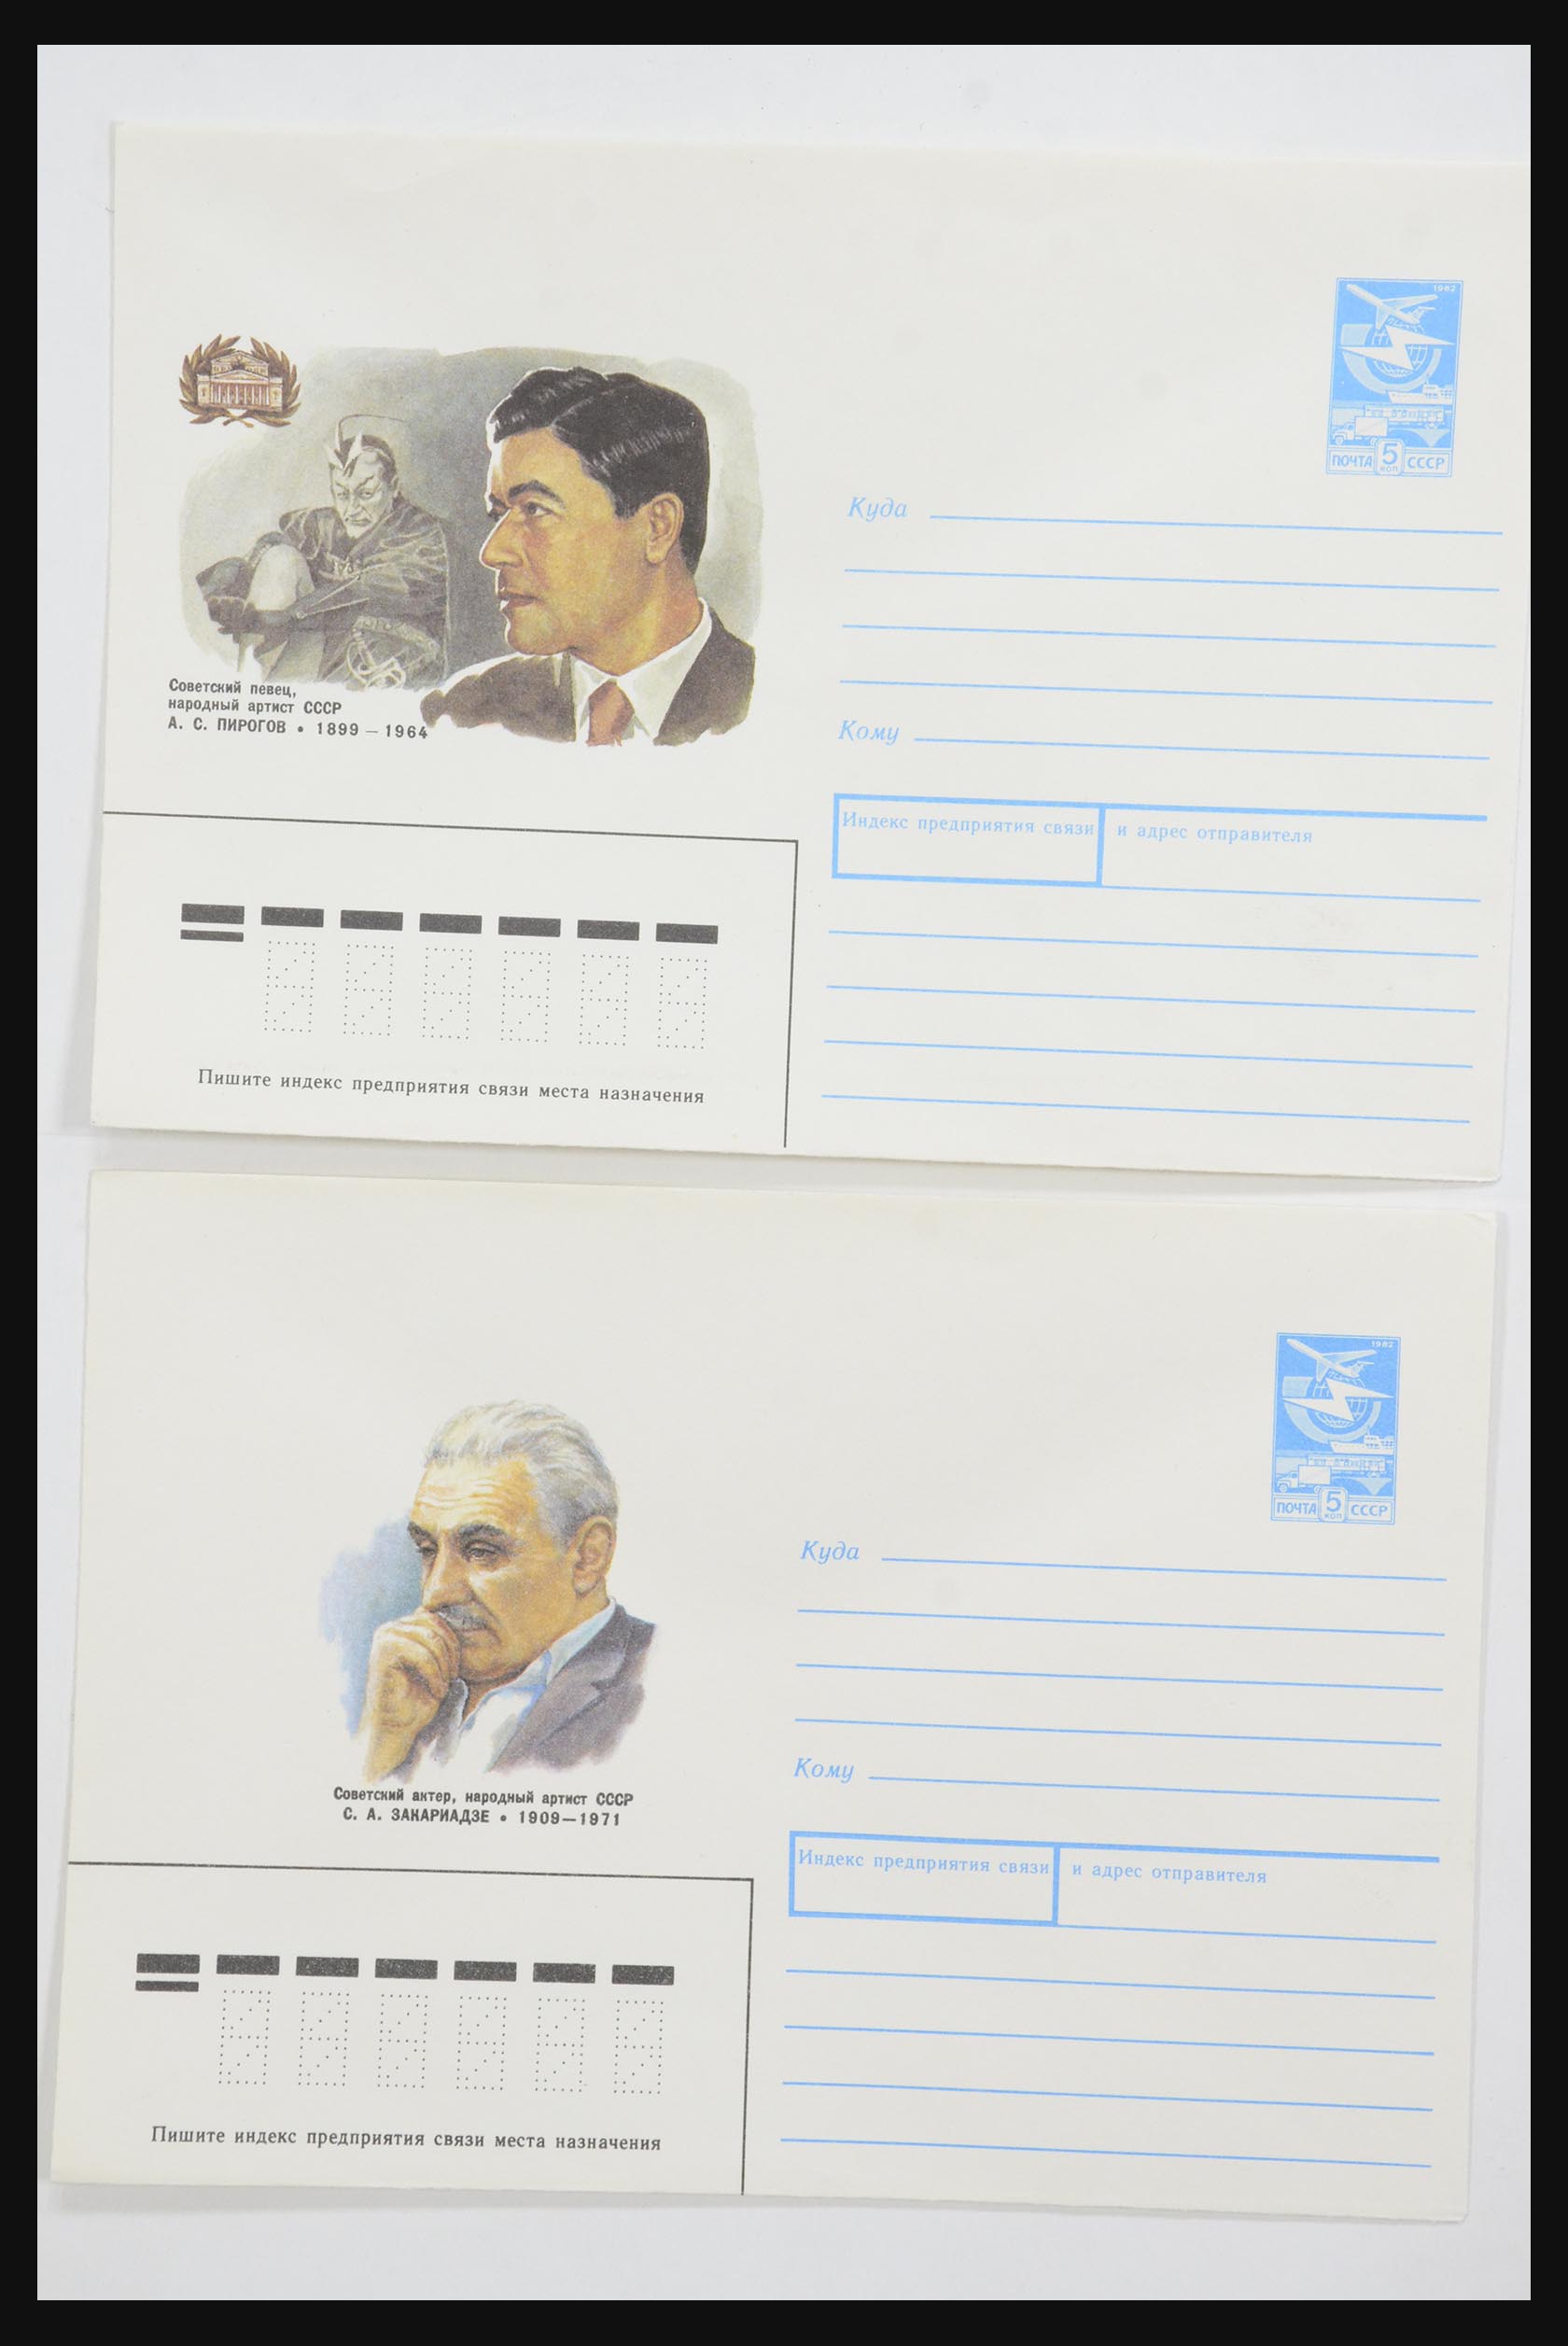 31928 0046 - 31928 Eastern Europe covers 1960's-1990's.